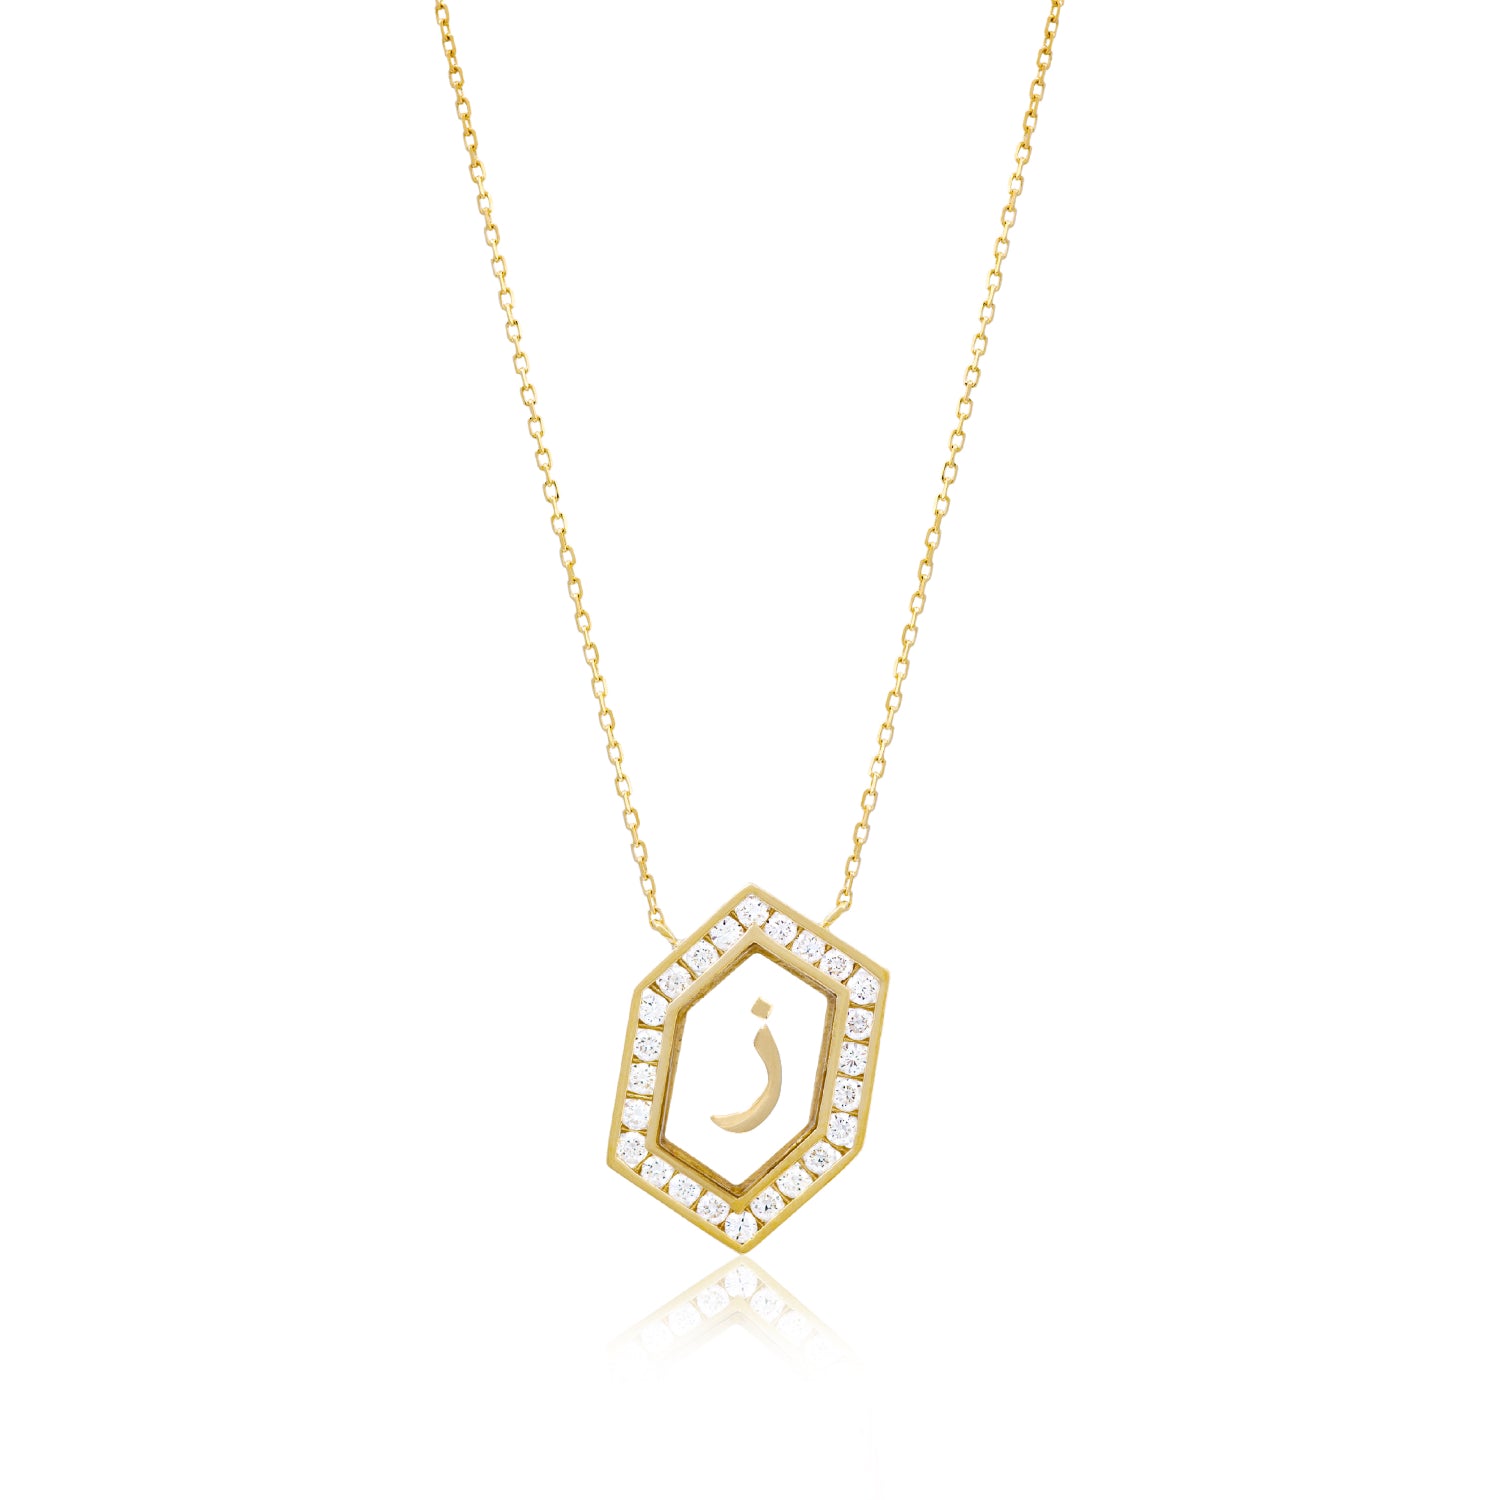 Qamoos 1.0 Letter ز Diamond Necklace in Yellow Gold